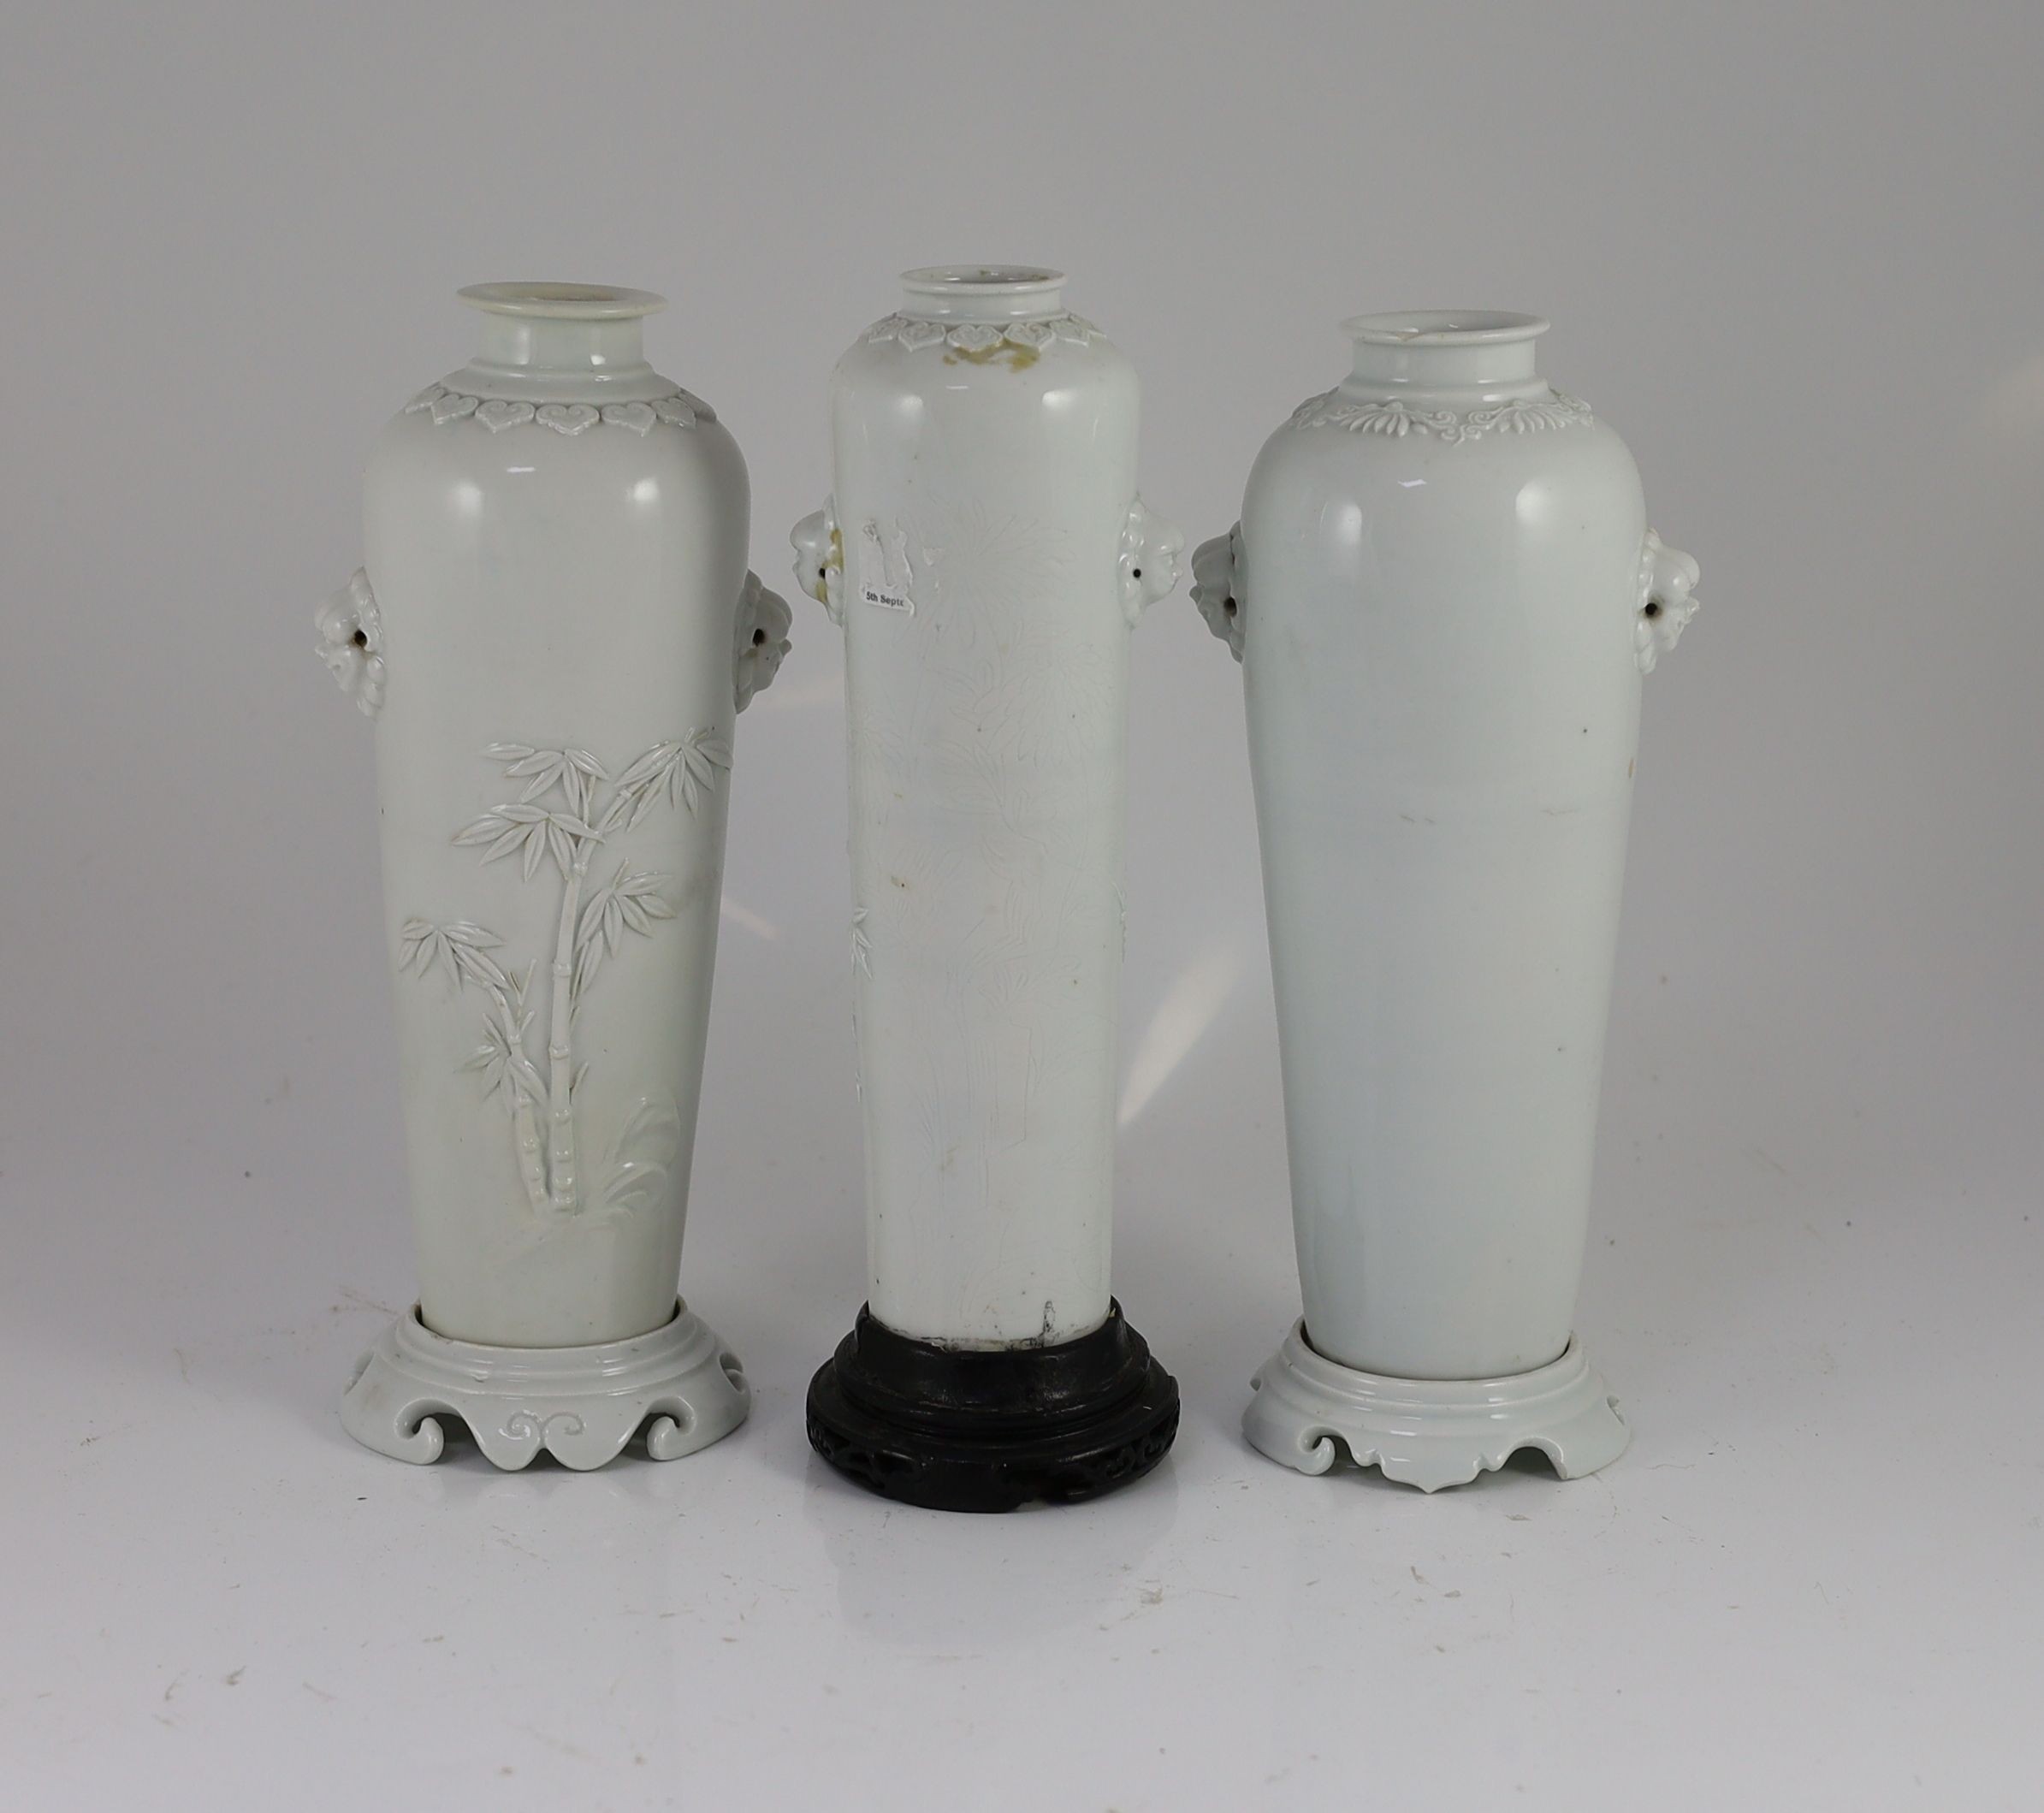 A near pair of Chinese blanc-de-chine sleeve vases with stands and a similar slender vase, Dehua kilns, 18th century Tallest 26cm high, damage